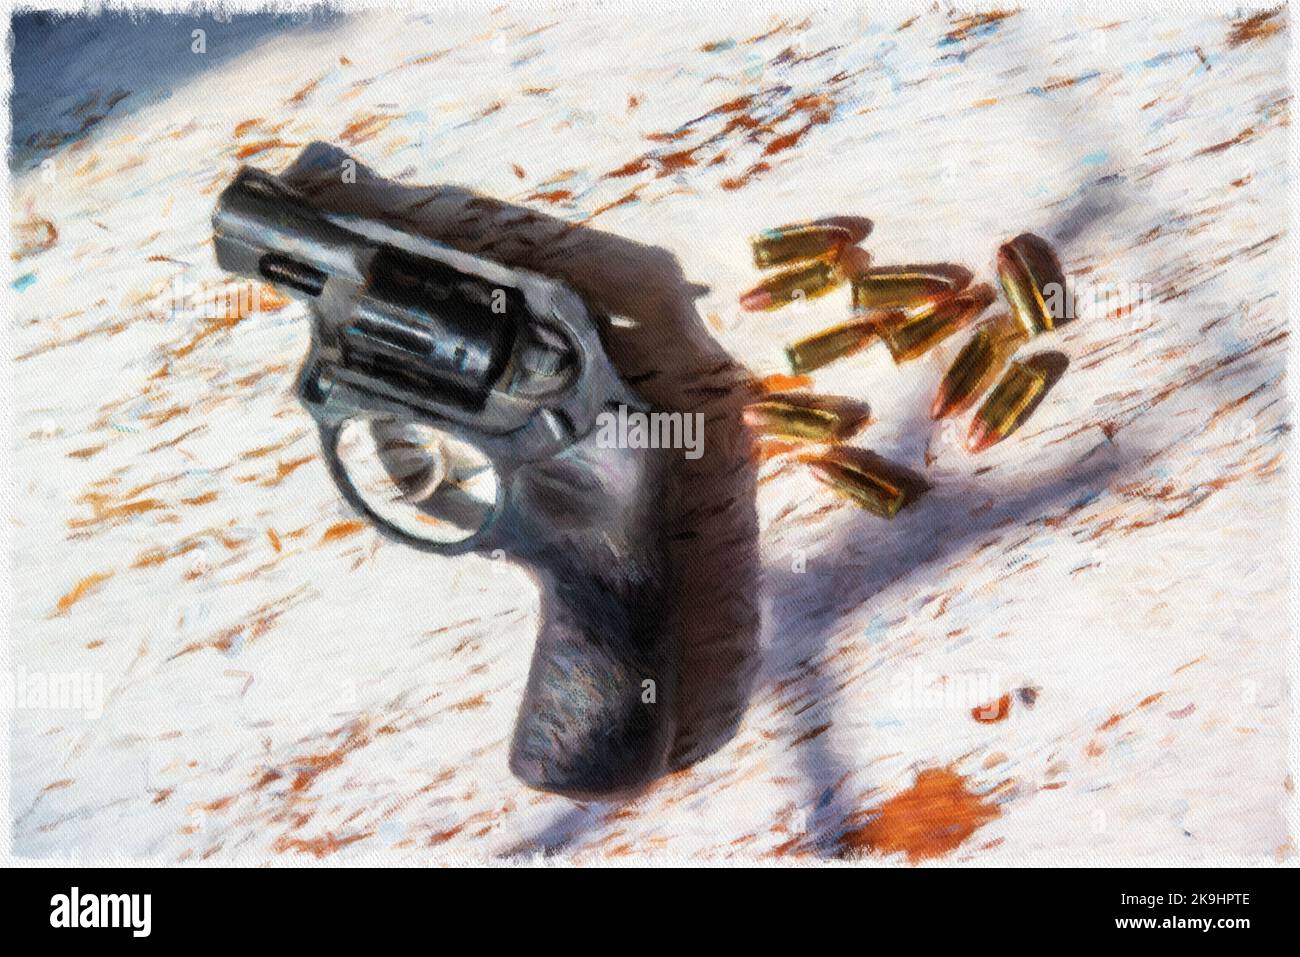 A black, Ruger, 9mm, snub-nosed revolver and a grouping of 9mm bullets. Stock Photo